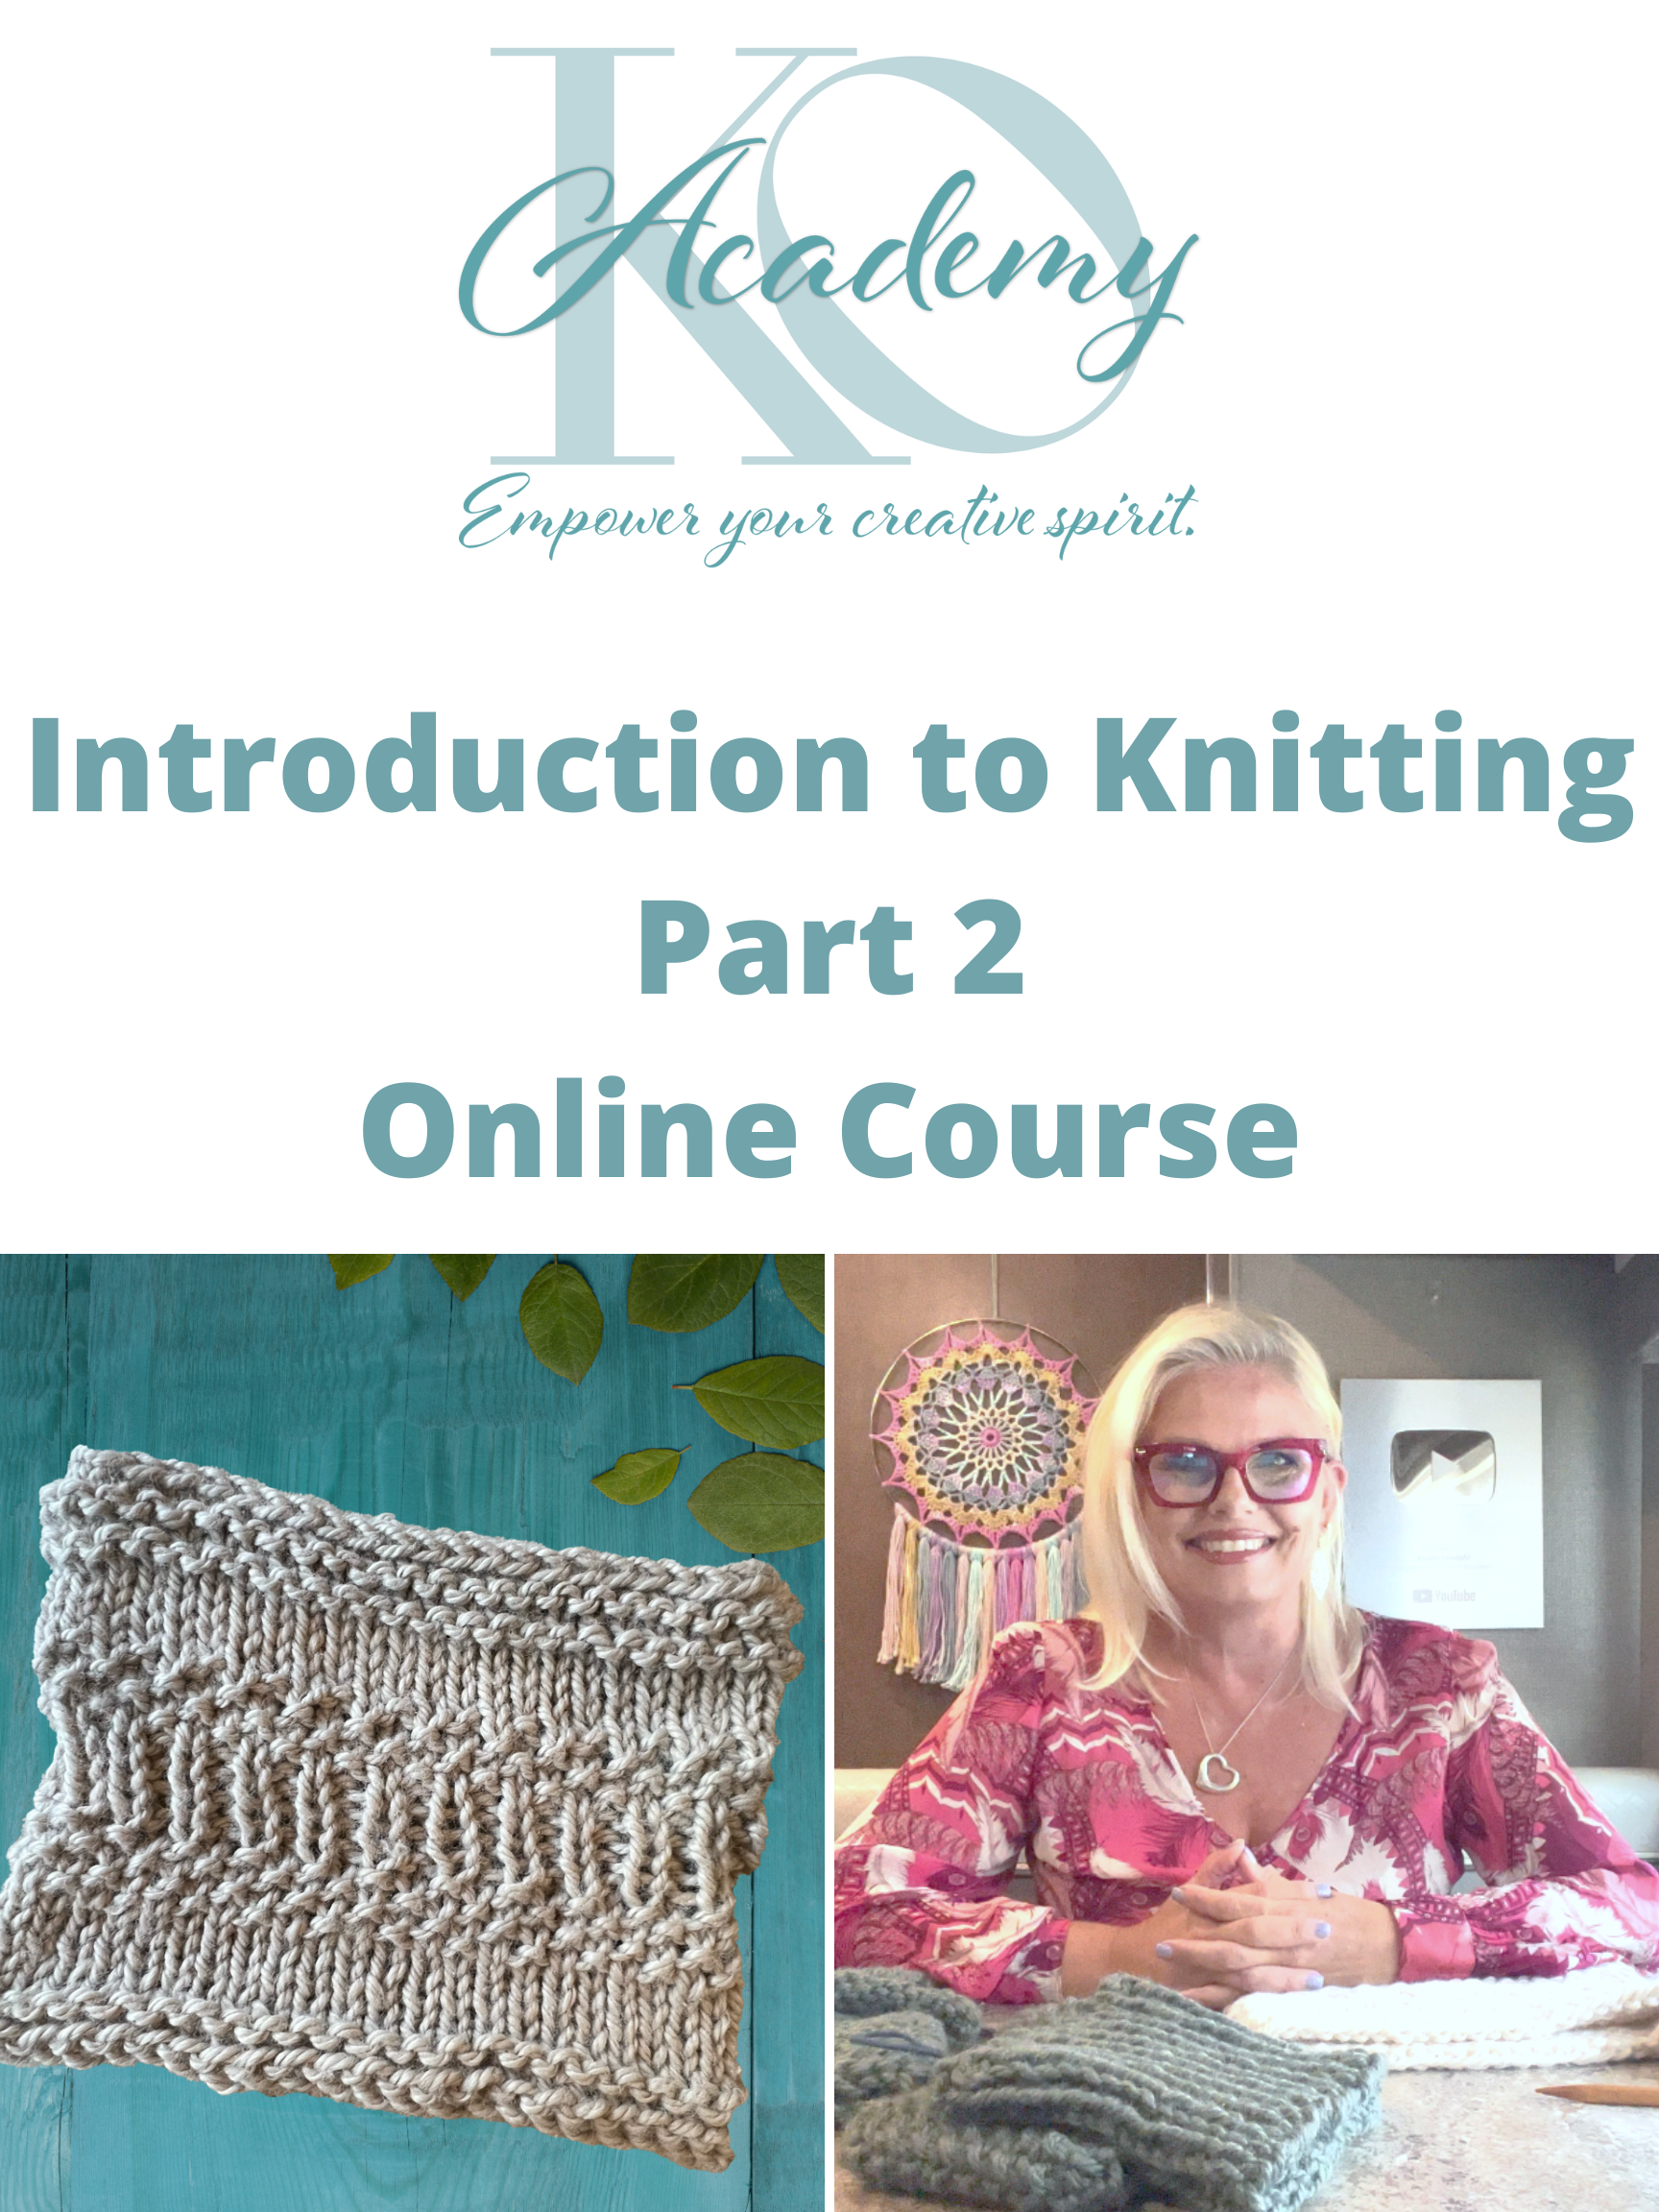 Beginner's knitting kit review: All you need to make your own scarf